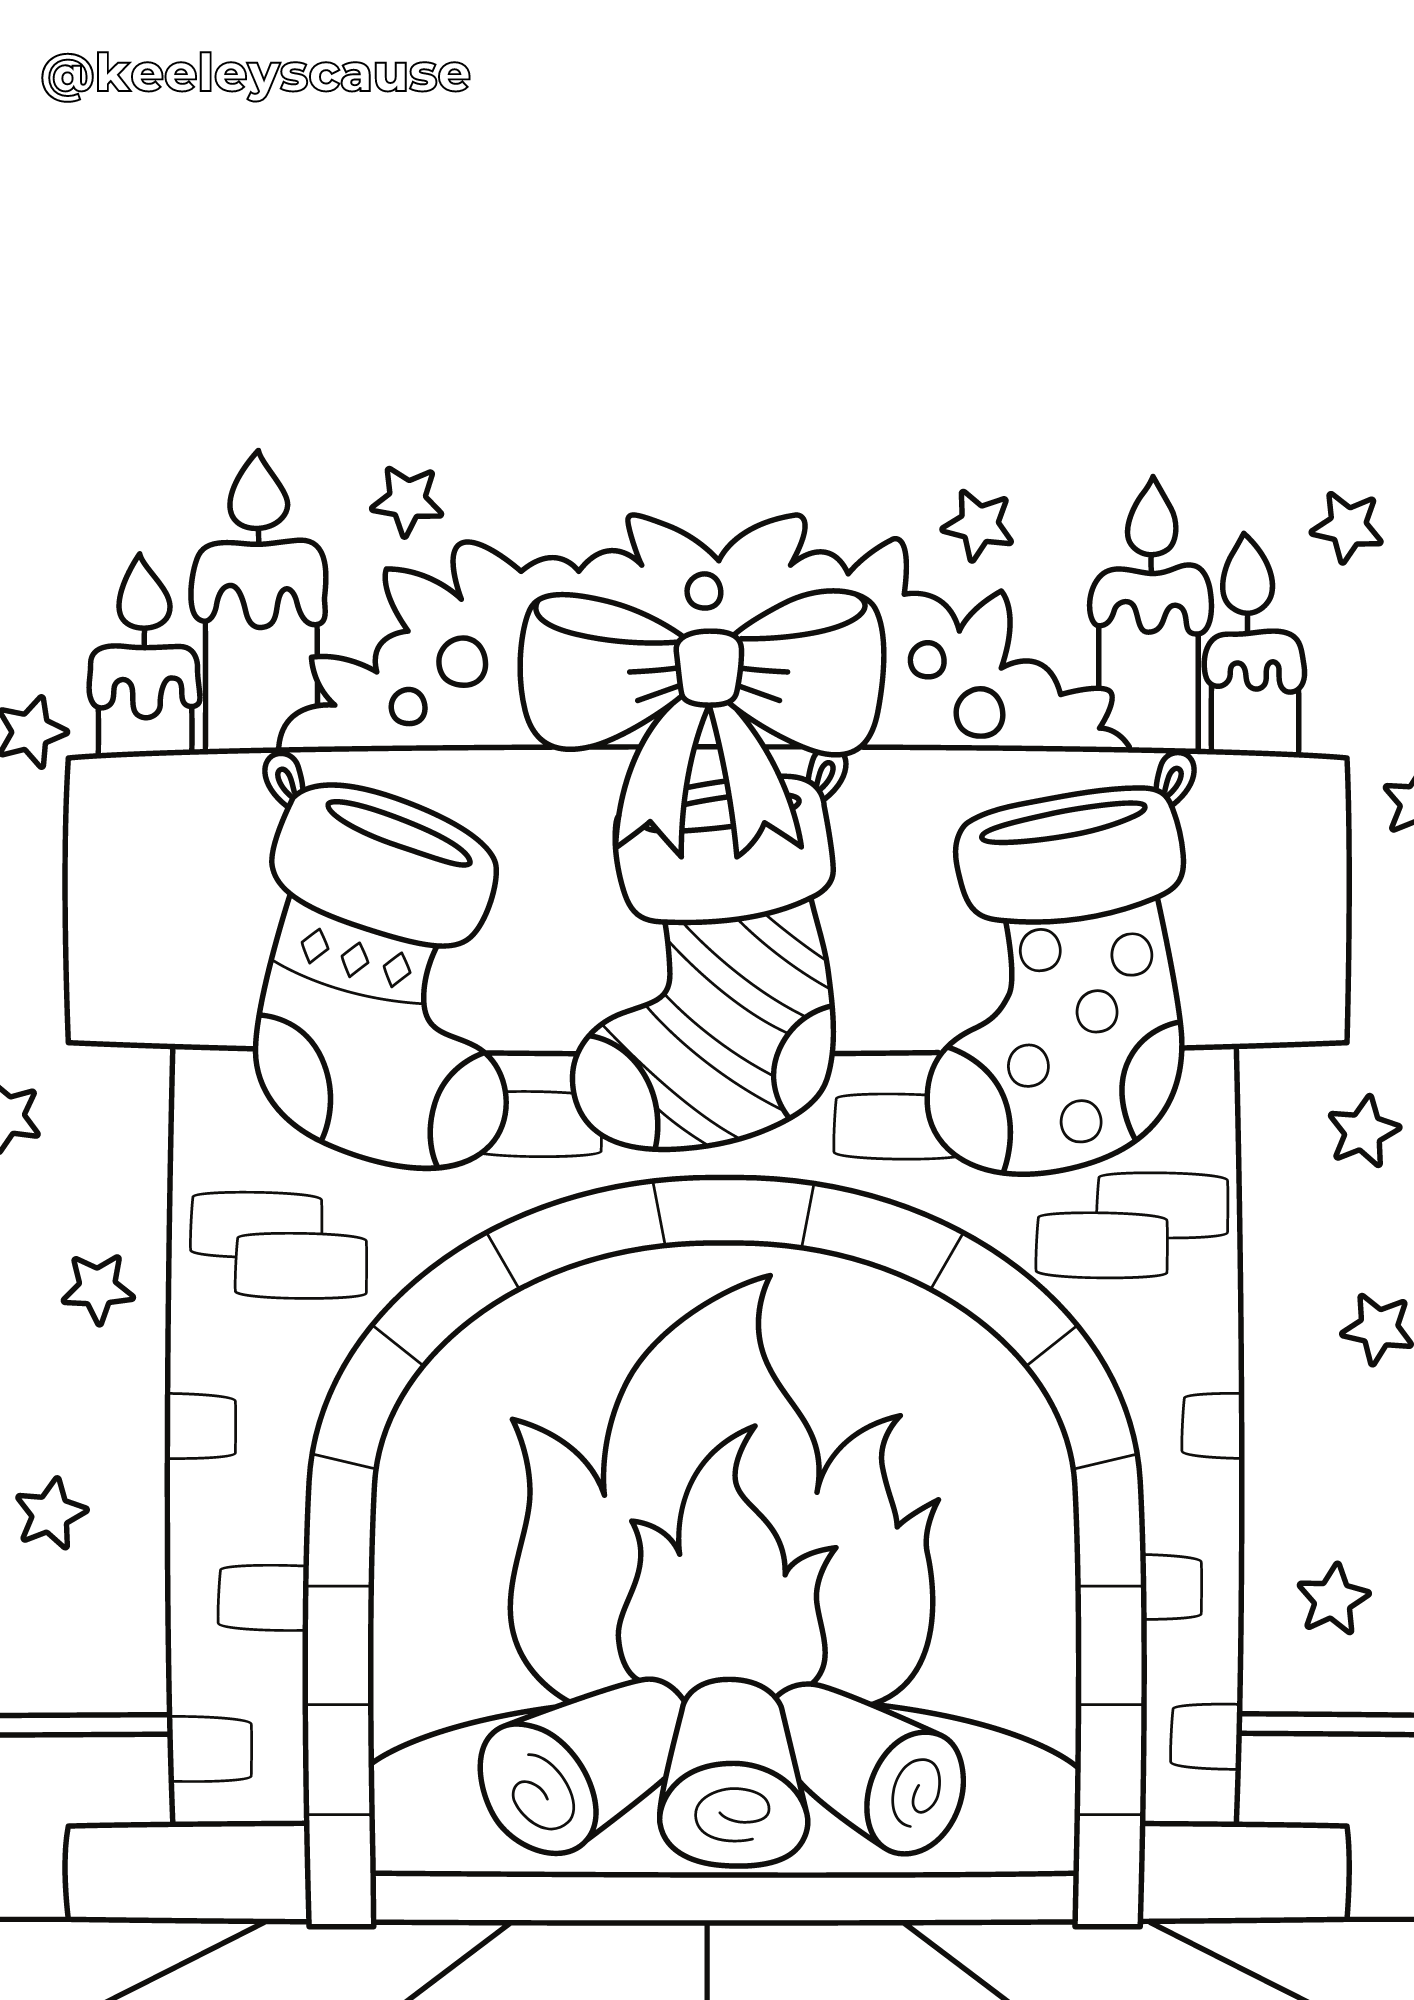 Keeley's Cause Merry Christmas Free Colouring Download